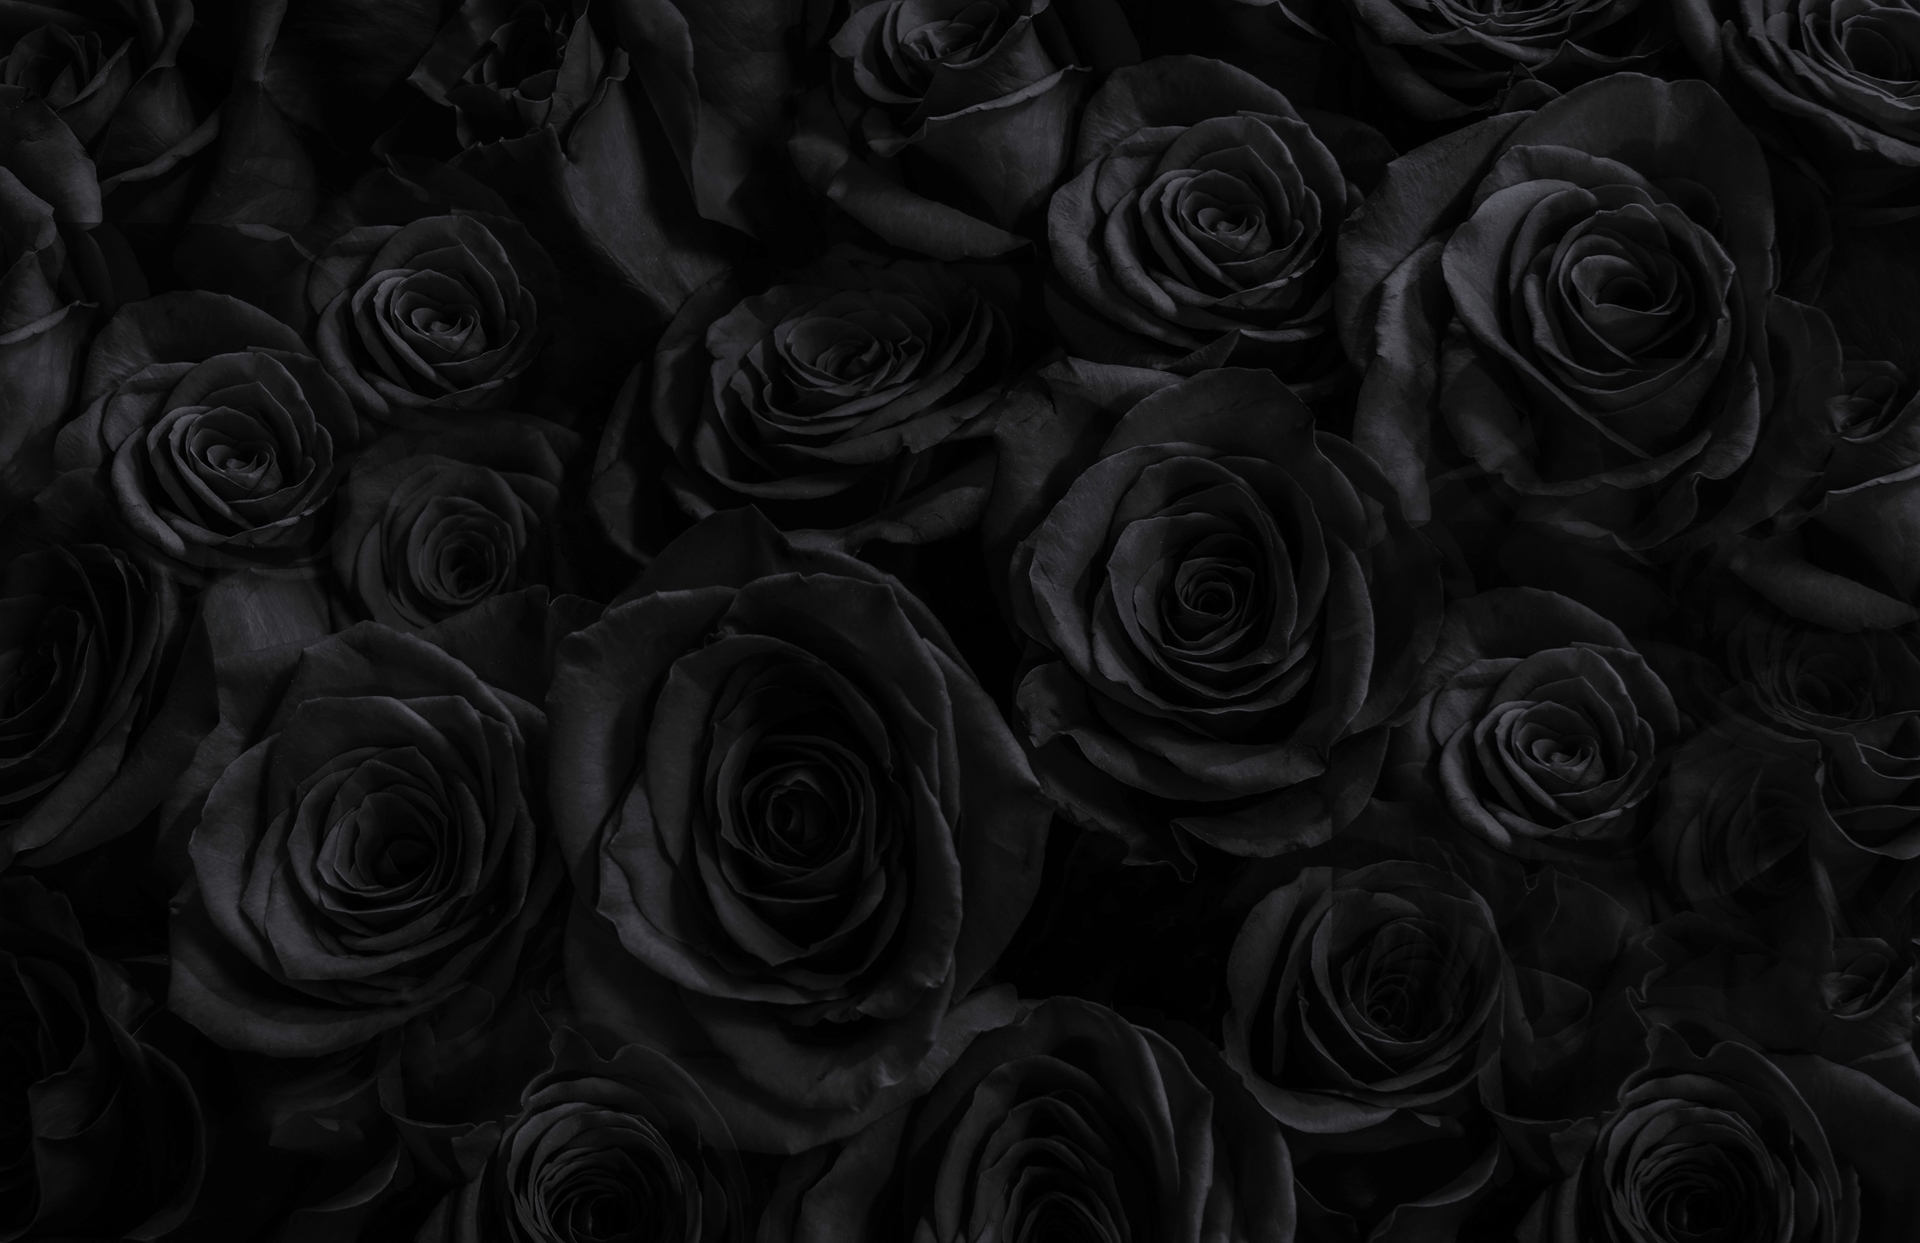 Blackout Black Roses. Click to learn more about the color.